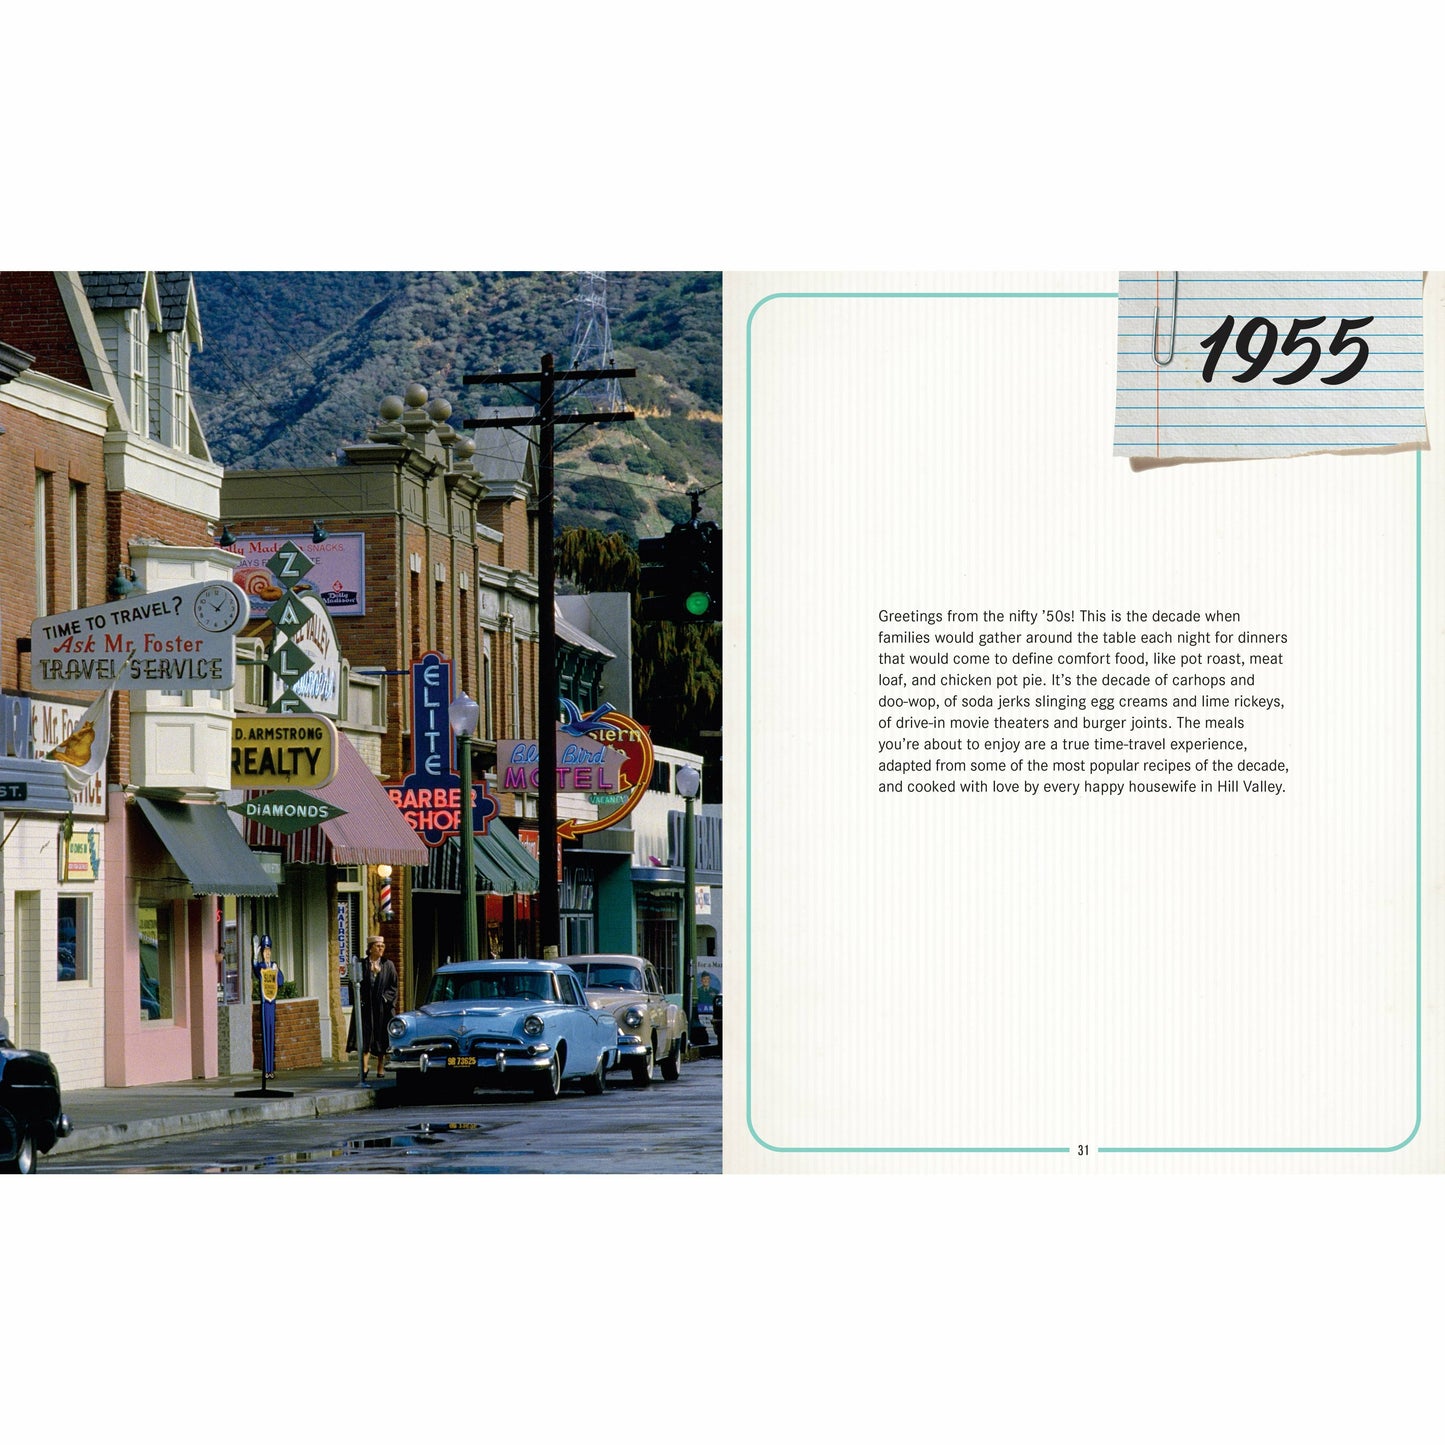 Back to the Future: The Official Hill Valley Cookbook hardcover book by Allison Robicelli